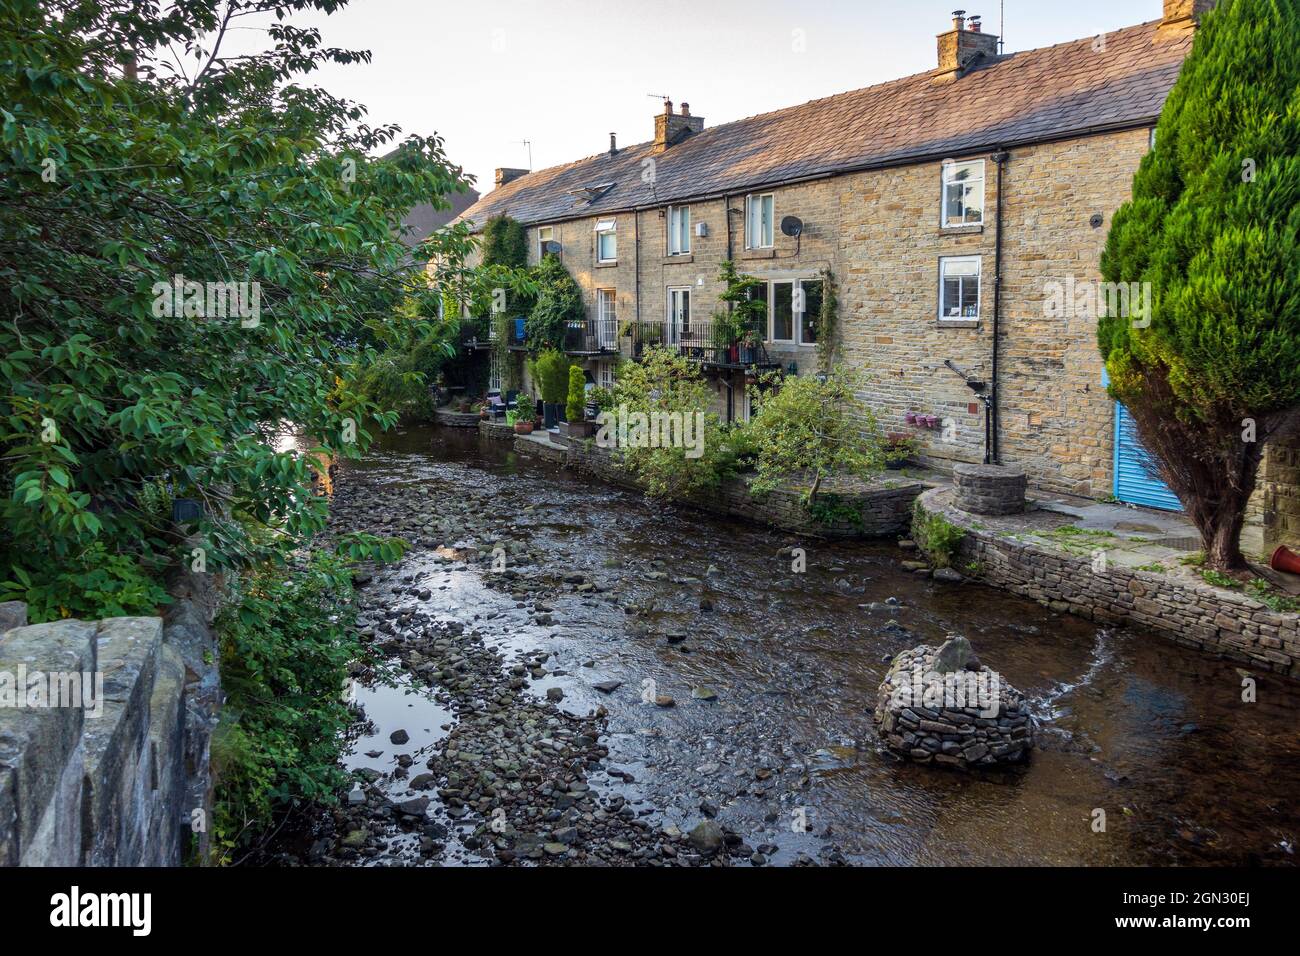 The River Sett running through the picturesque village of Hayfield in High Peak, Derbyshire, England, Uk Stock Photo